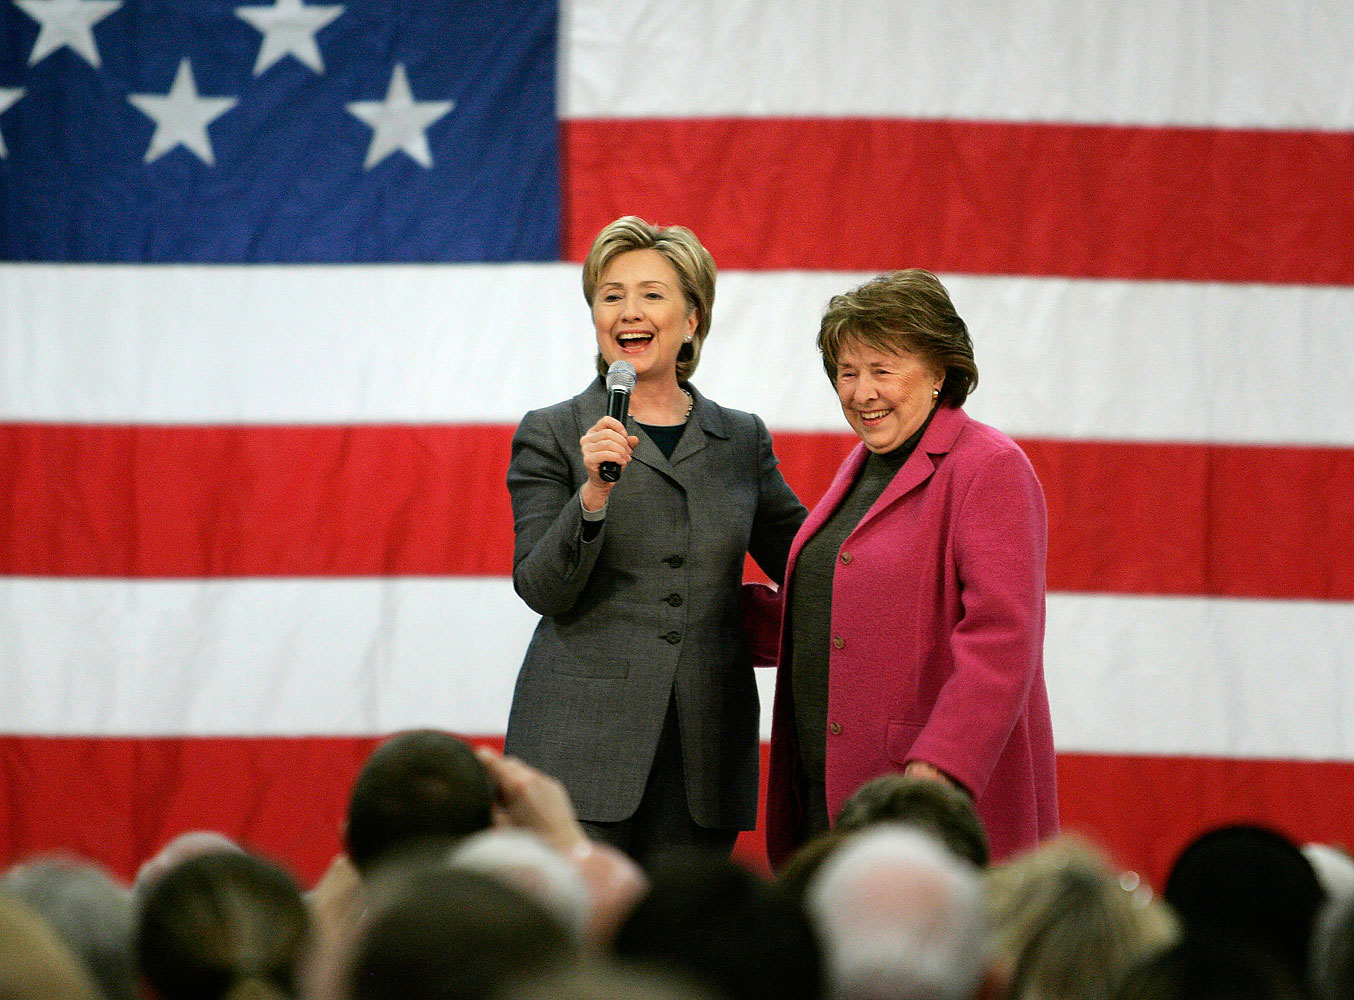 U.S. Presidential candidate, Senator Hillary Clinton (D-NY) speaks on stage with her mother Dorothy Rodham, during a rally in Des Moines